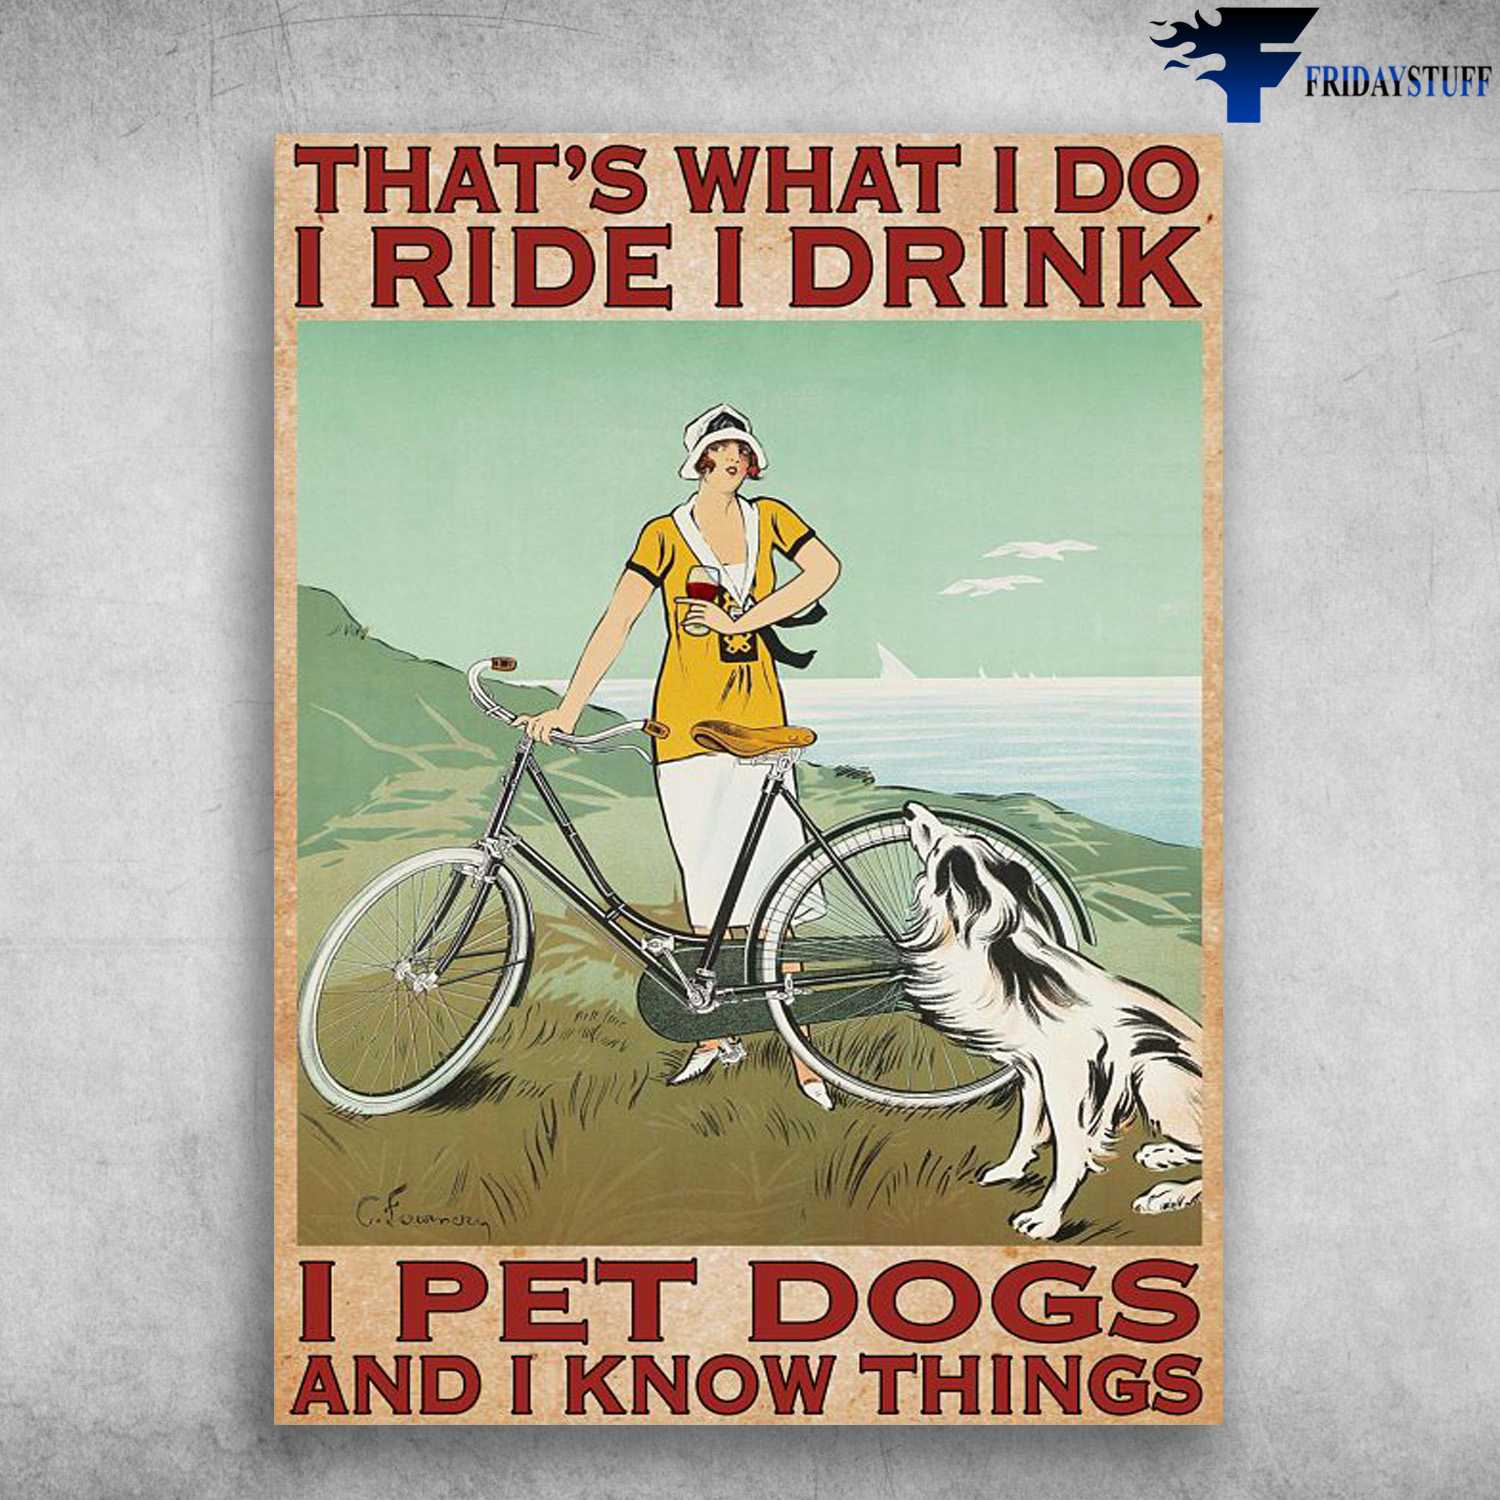 Dog And Wine, Cycling With Dog, That's What I Do, I Ride, I Drink, I Pet Dogs, And I Know Things